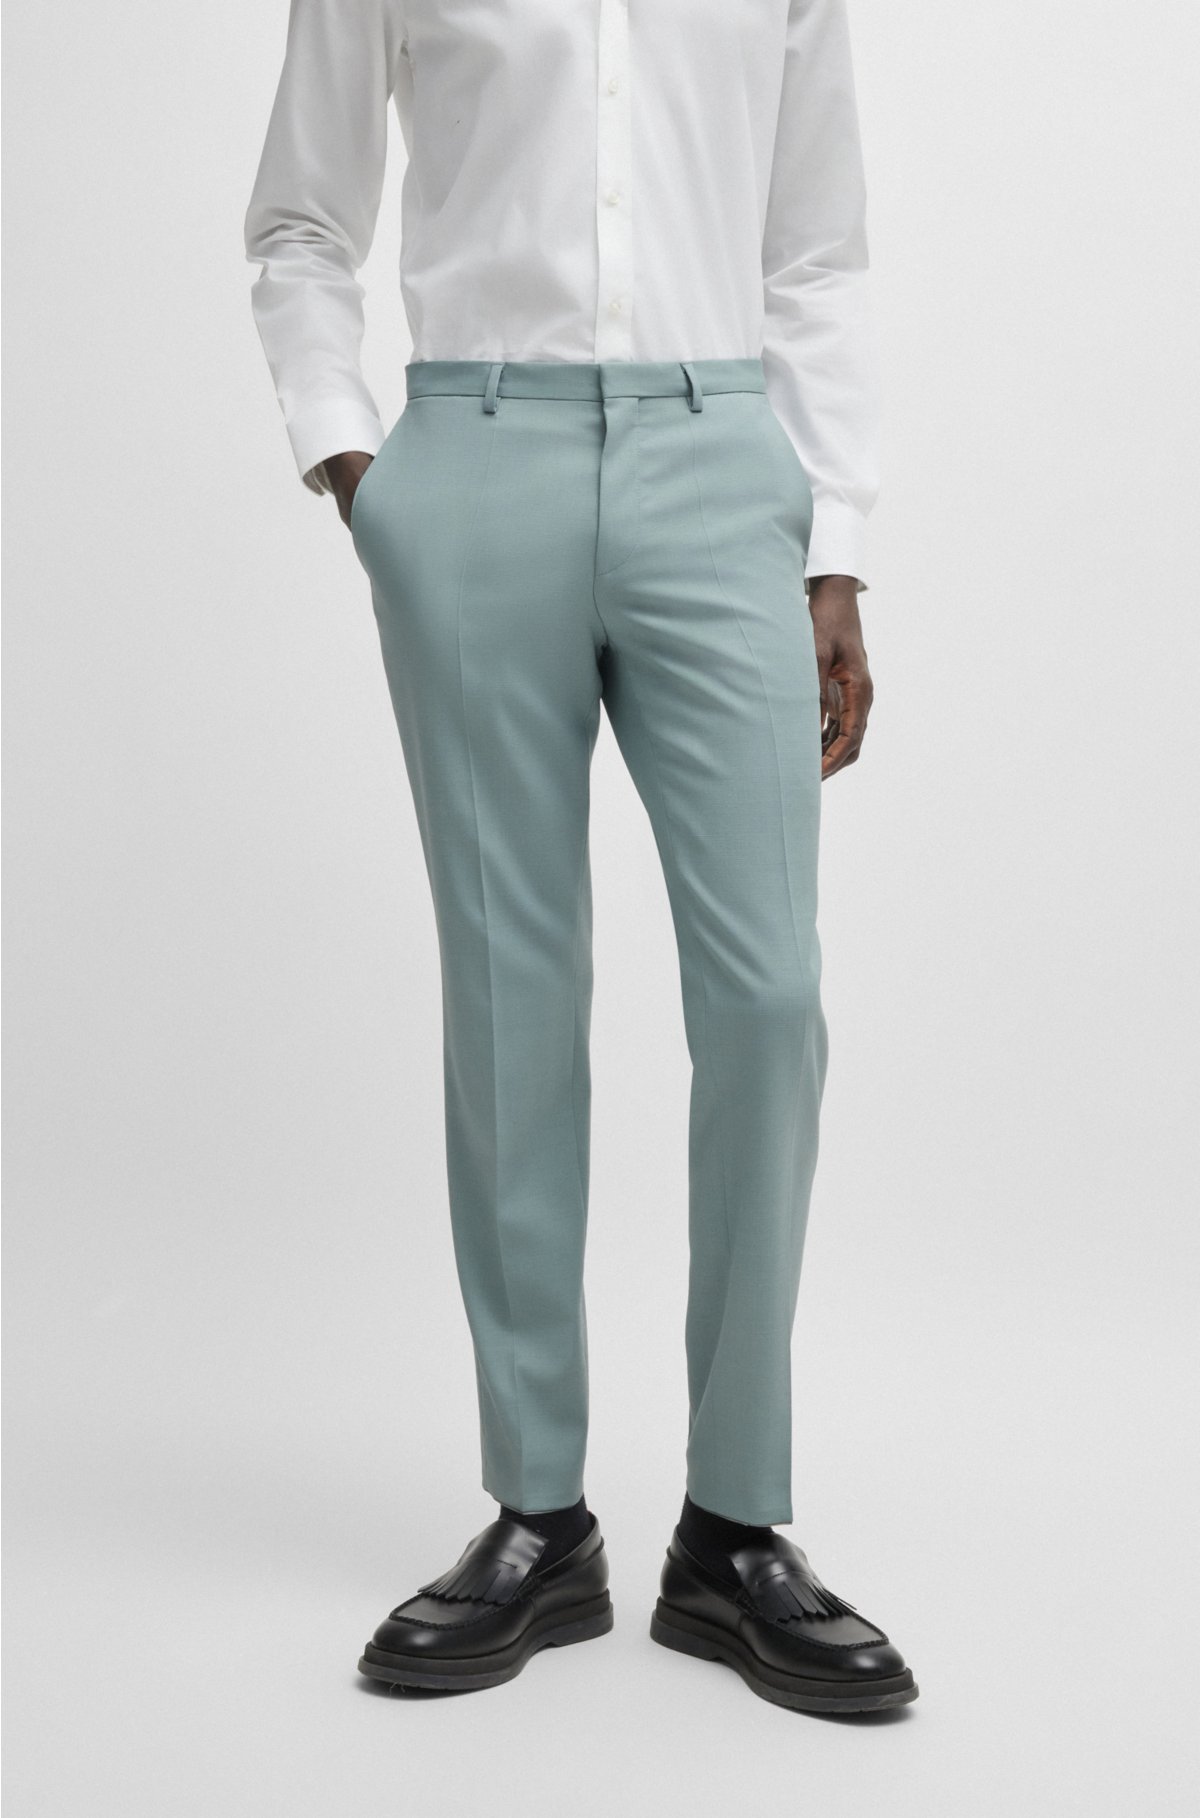 Extra-slim-fit suit in patterned stretch fabric, Light Blue